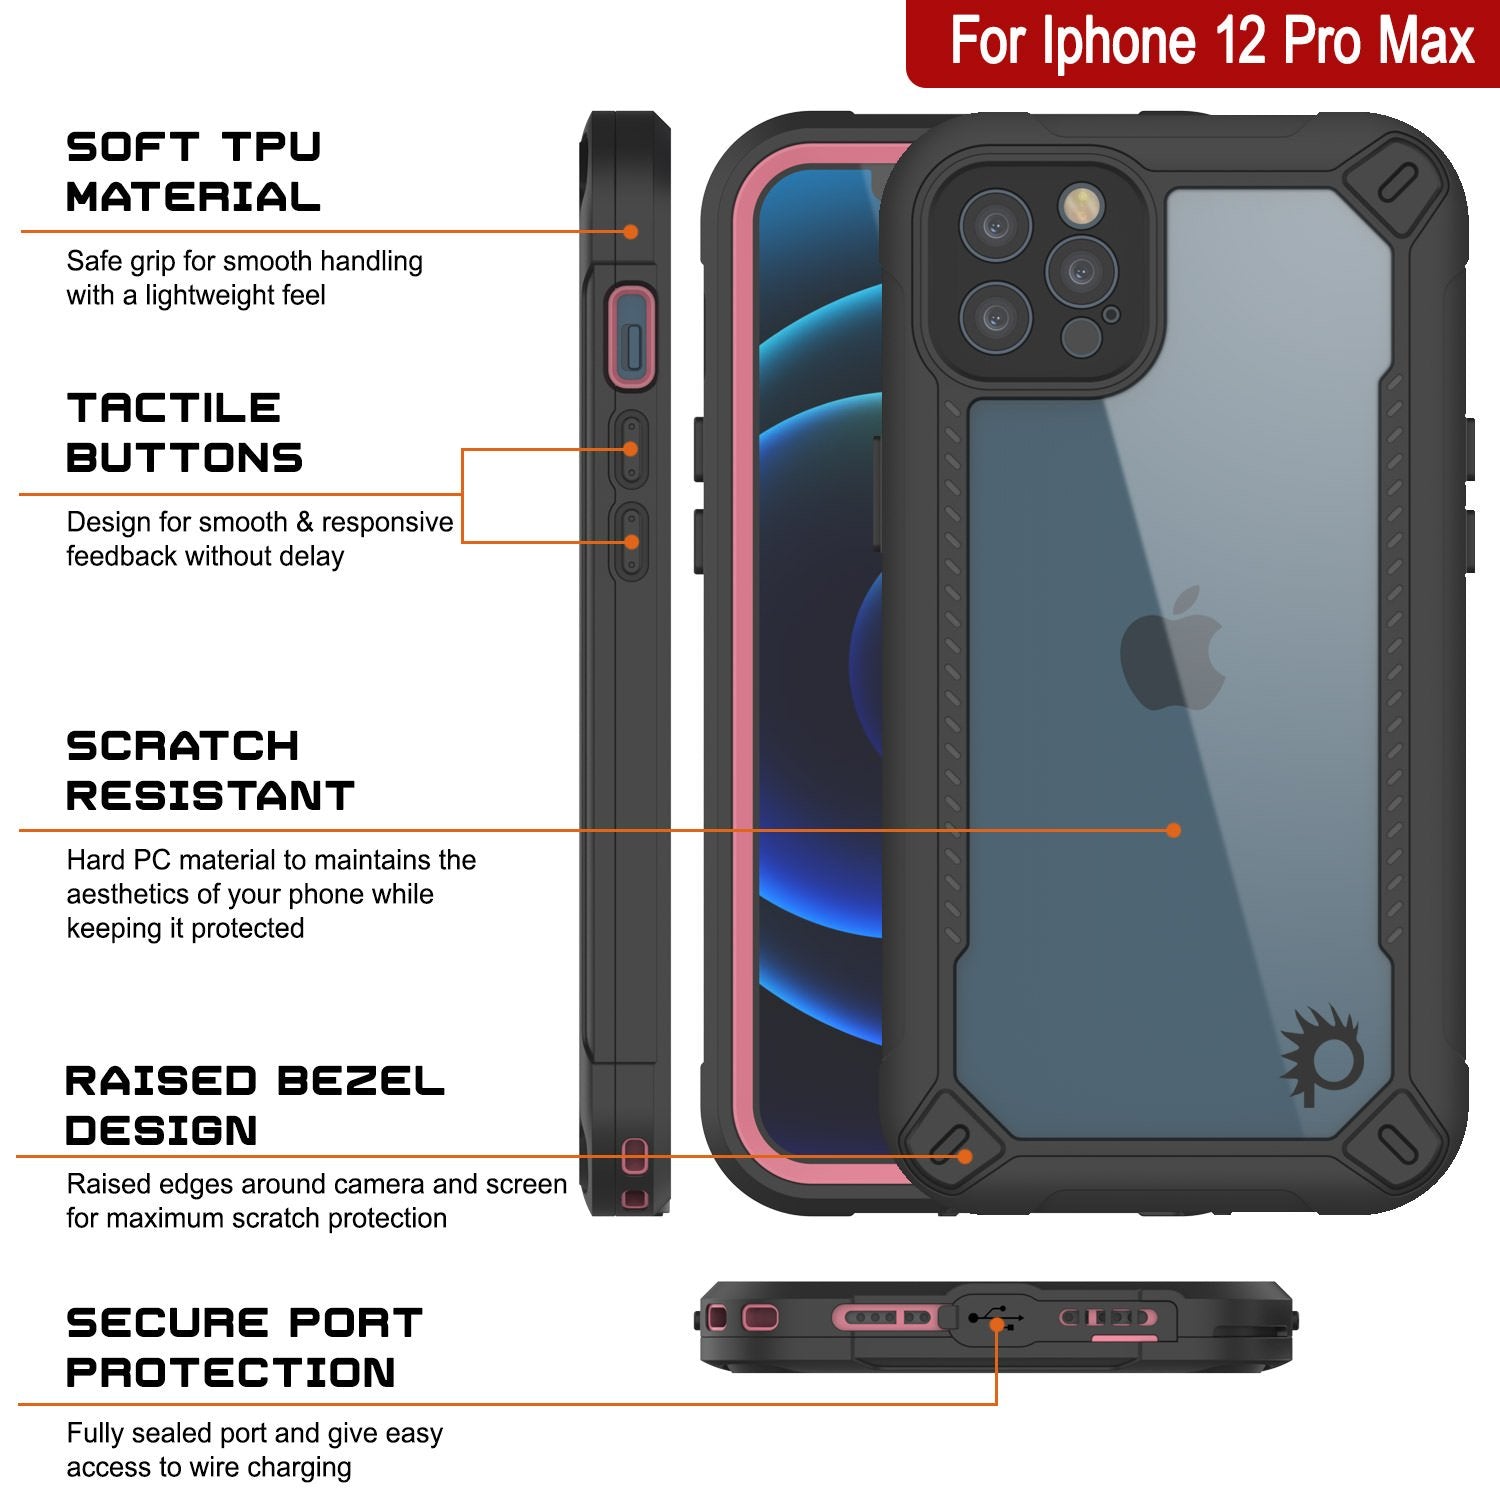 iPhone 12 Pro Max Waterproof IP68 Case, Punkcase [pink]  [Maximus Series] [Slim Fit] [IP68 Certified] [Shockresistant] Clear Armor Cover with Screen Protector | Ultimate Protection